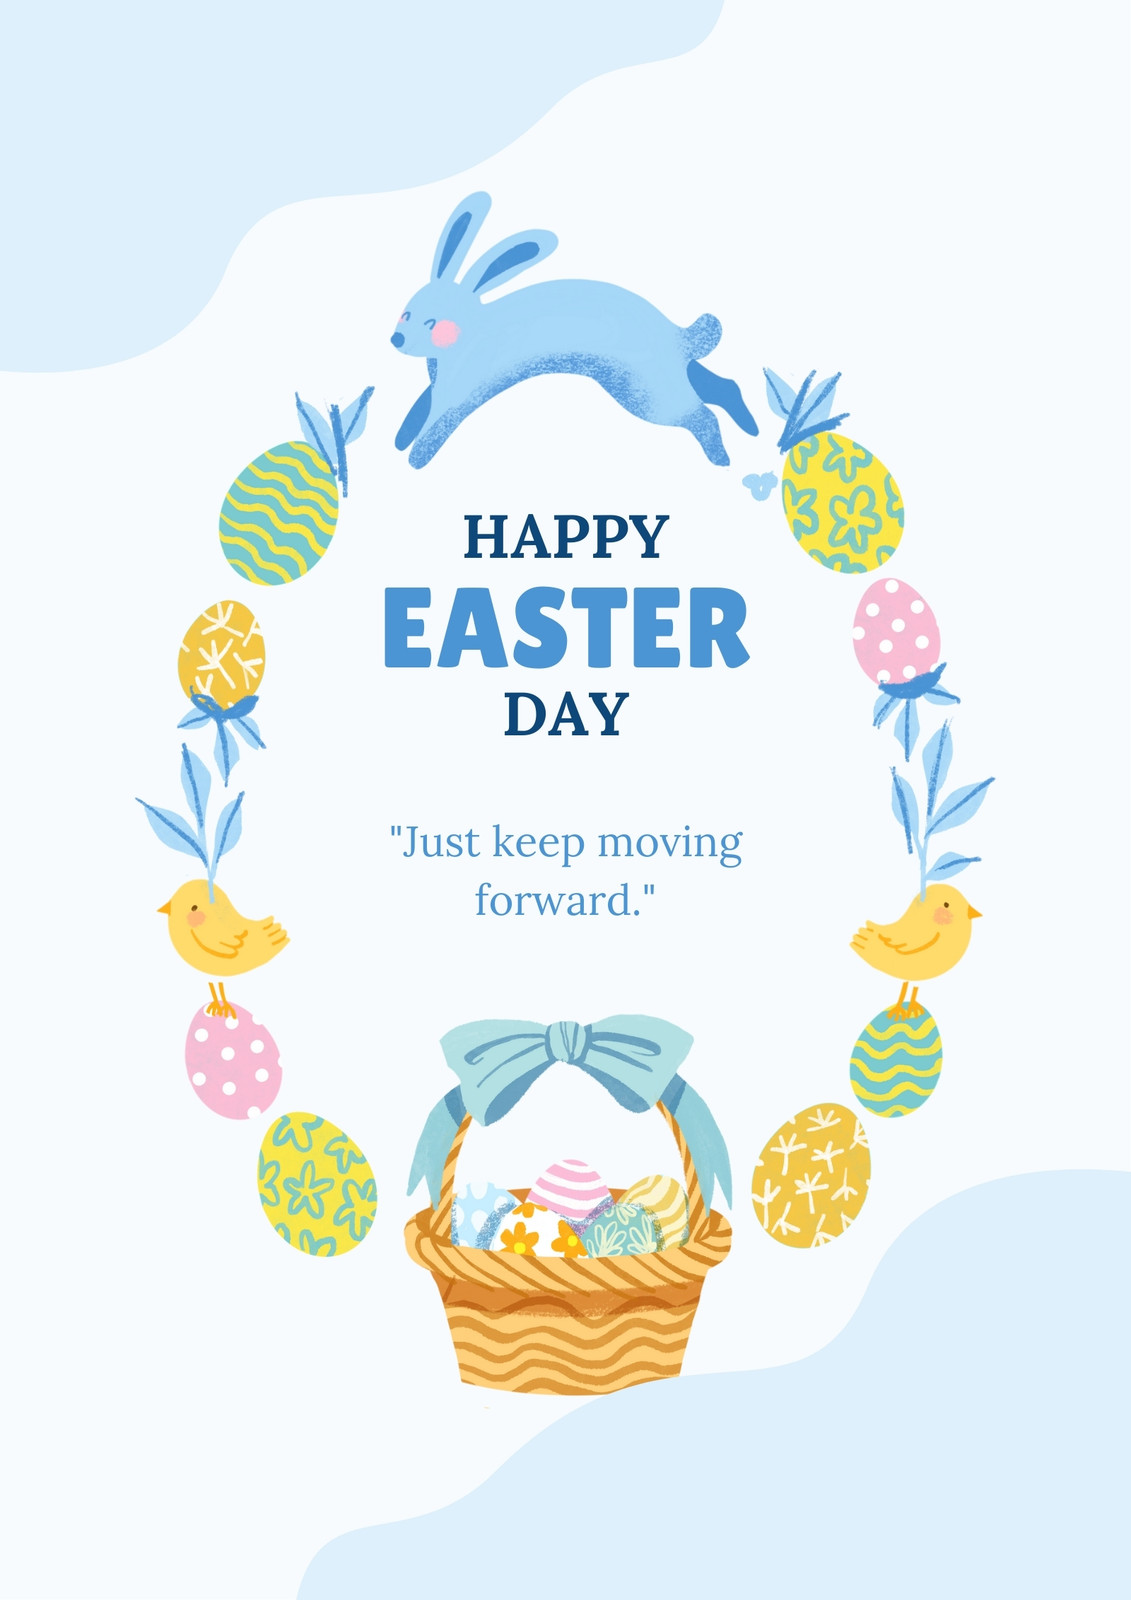 Page 18 - Free customizable, printable Easter poster templates | Canva